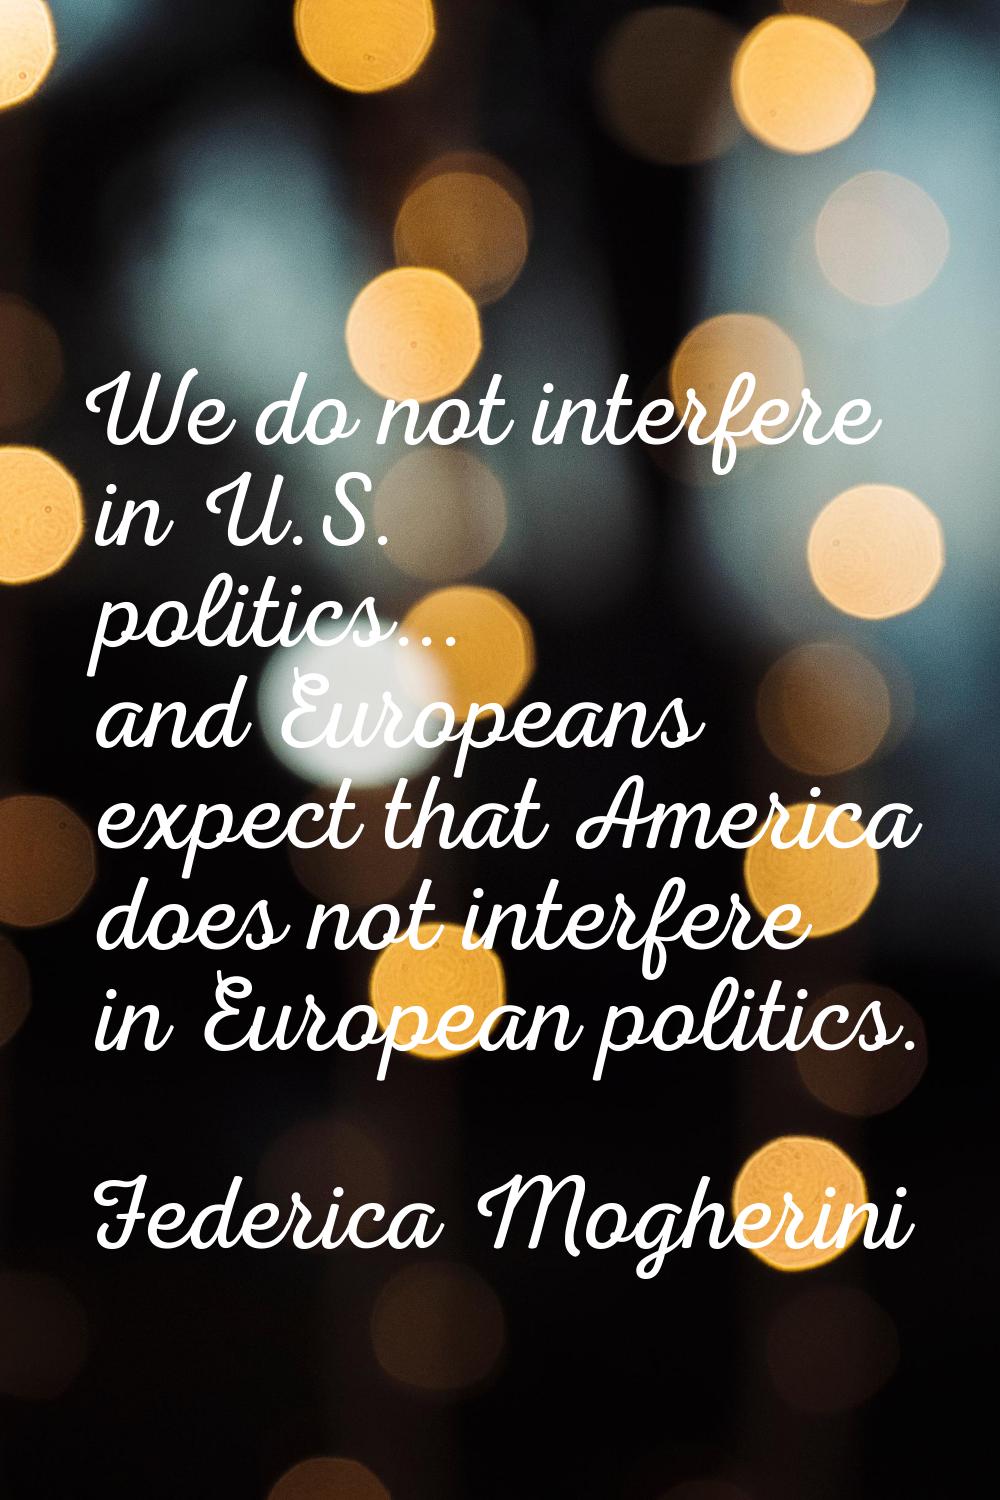 We do not interfere in U.S. politics... and Europeans expect that America does not interfere in Eur